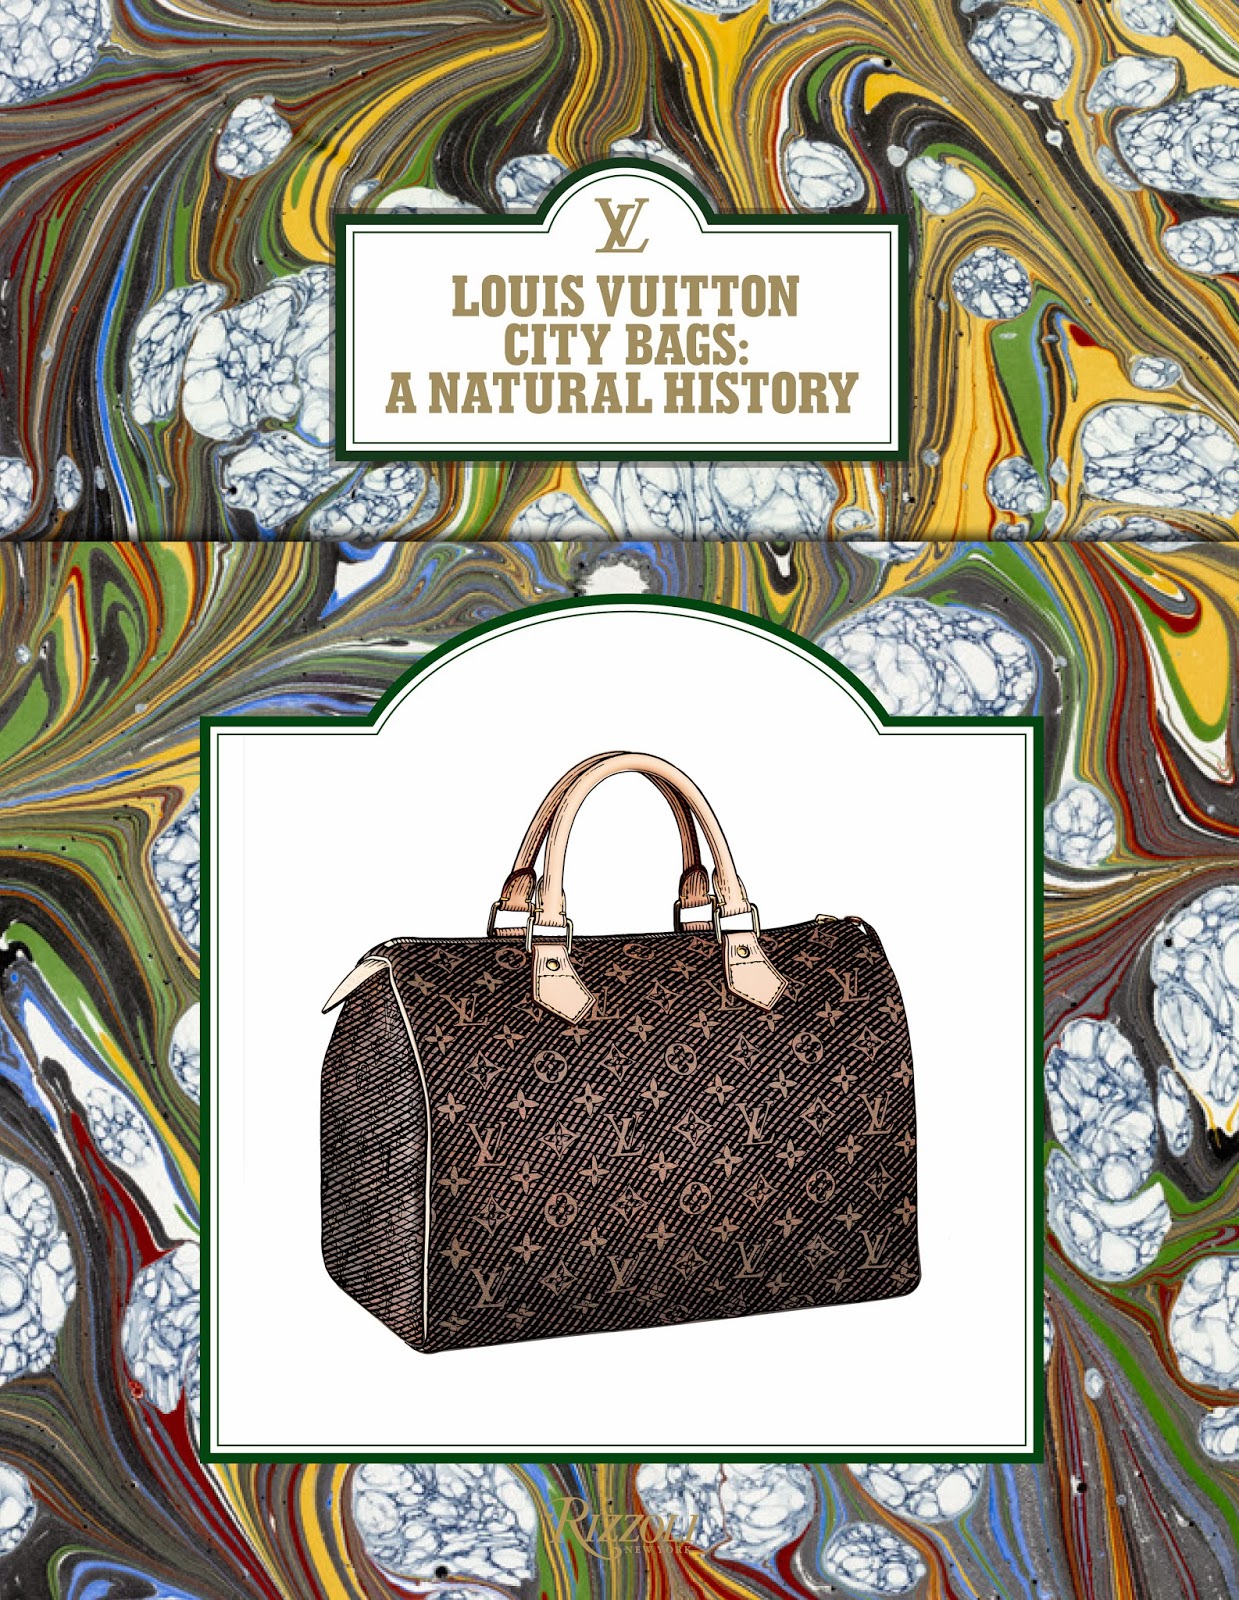 history of louis vuitton book